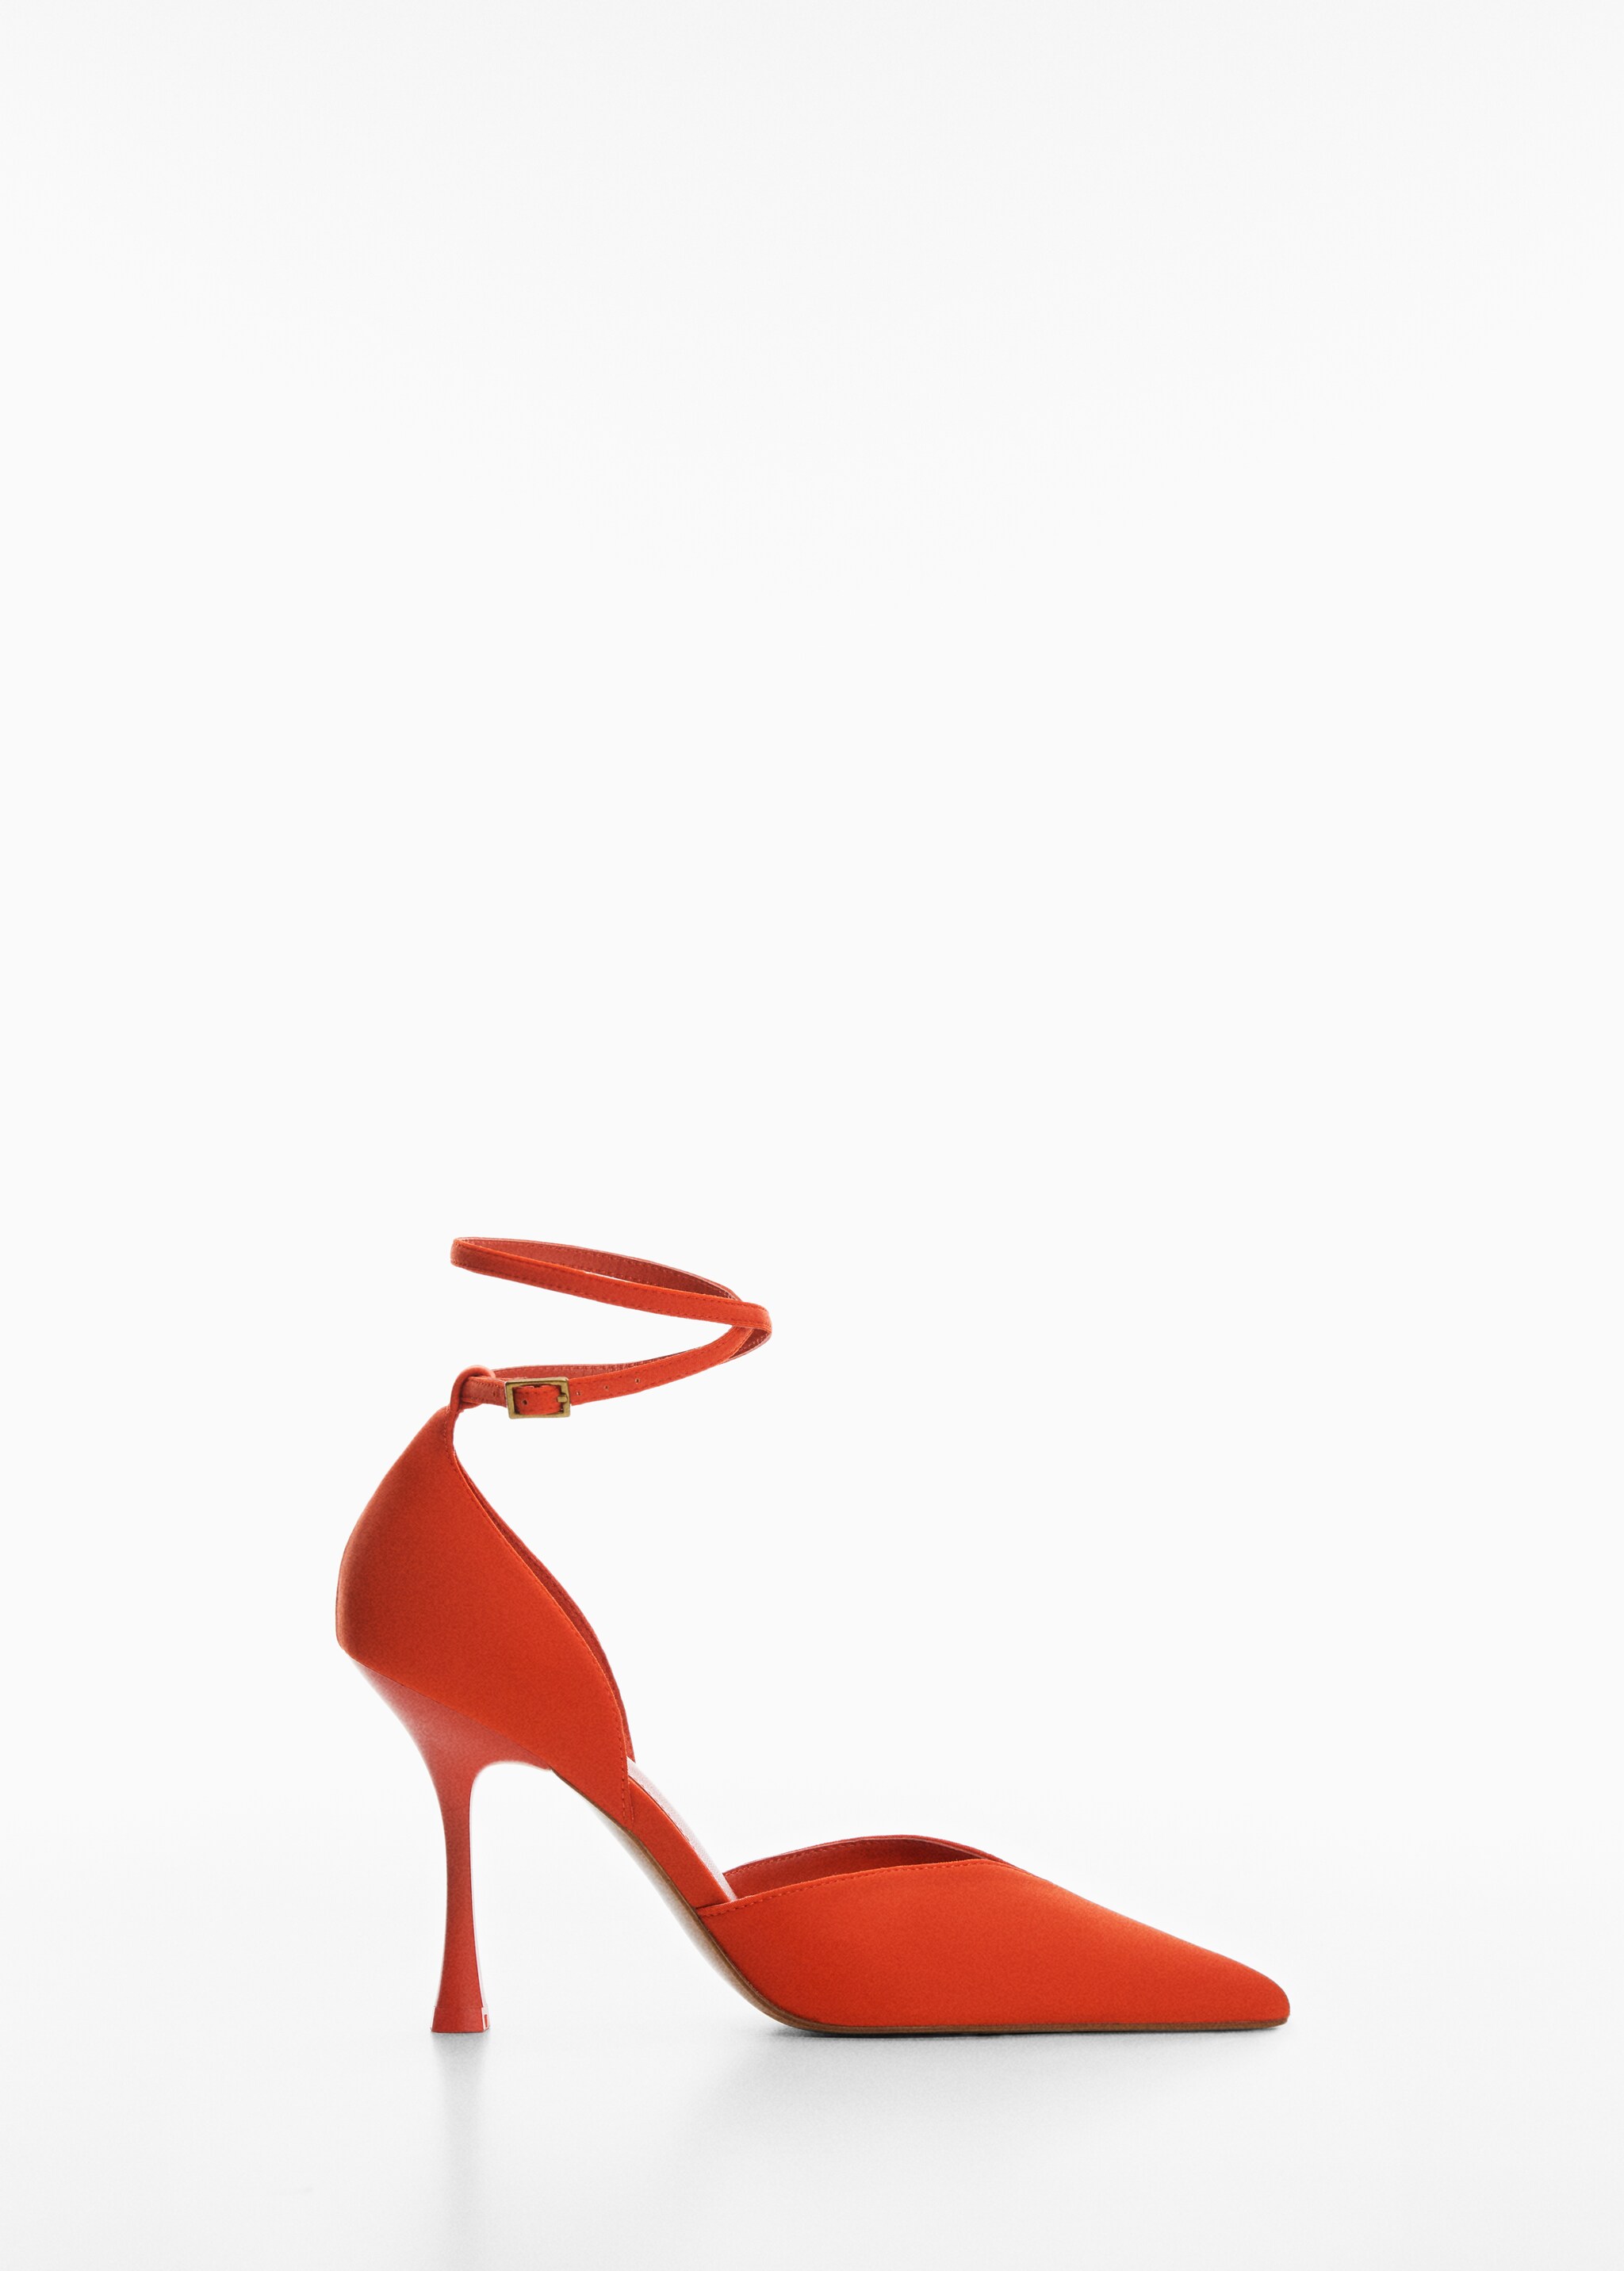 Ankle-cuff pointed toe shoes - Article without model